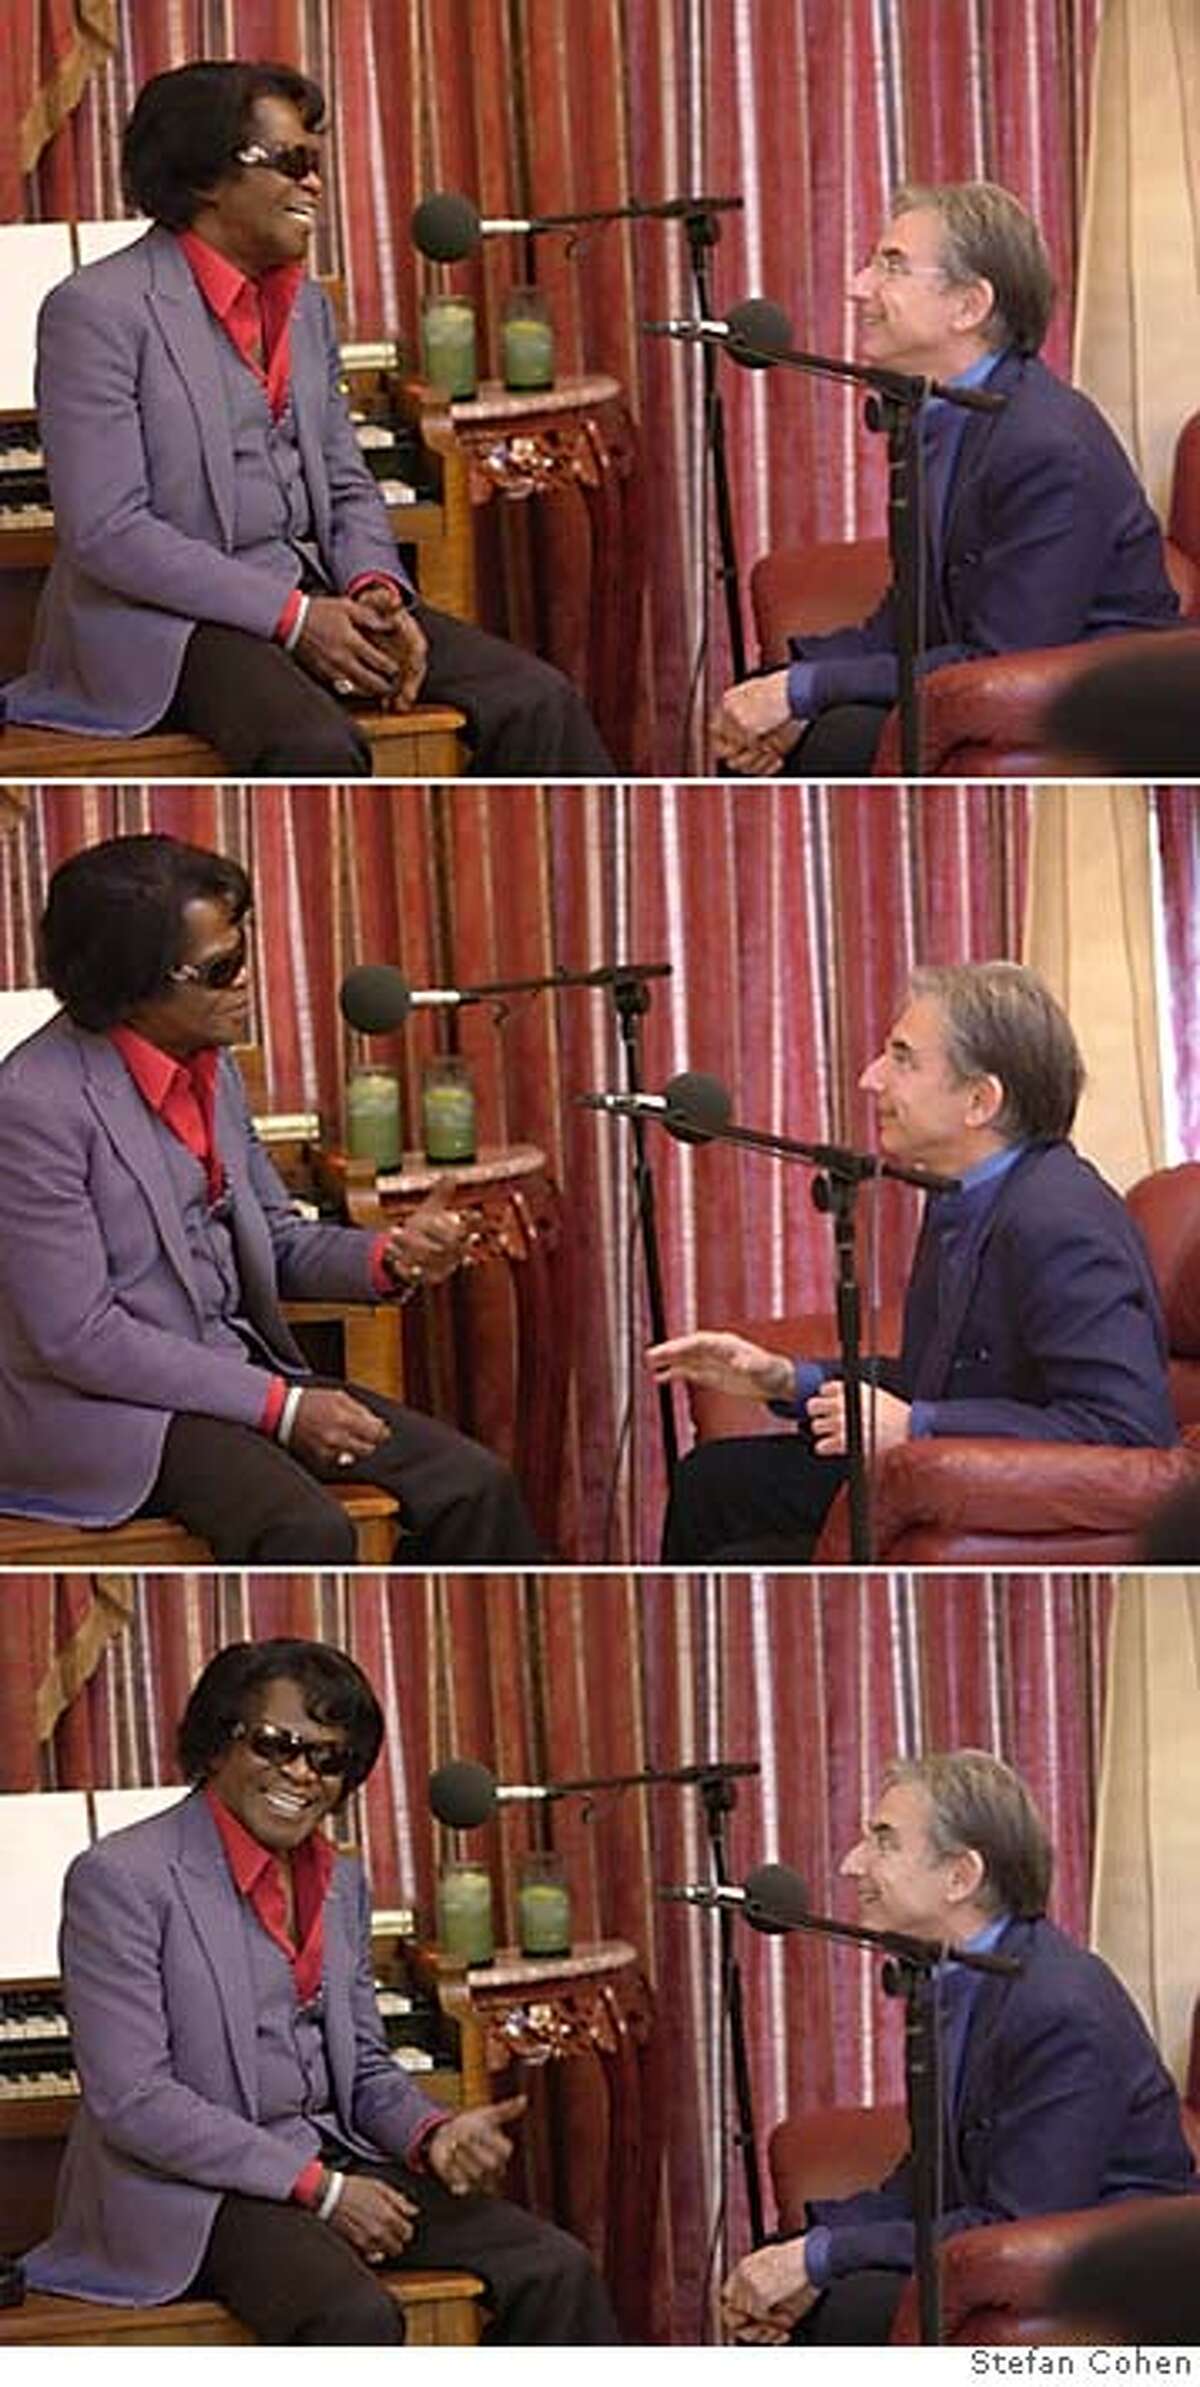 MTT interviews the legendary James Brown for the San Francisco Symphony's Keeping Score project, with public radio episodes airing in January 07 Photo credit: Stefan Cohen